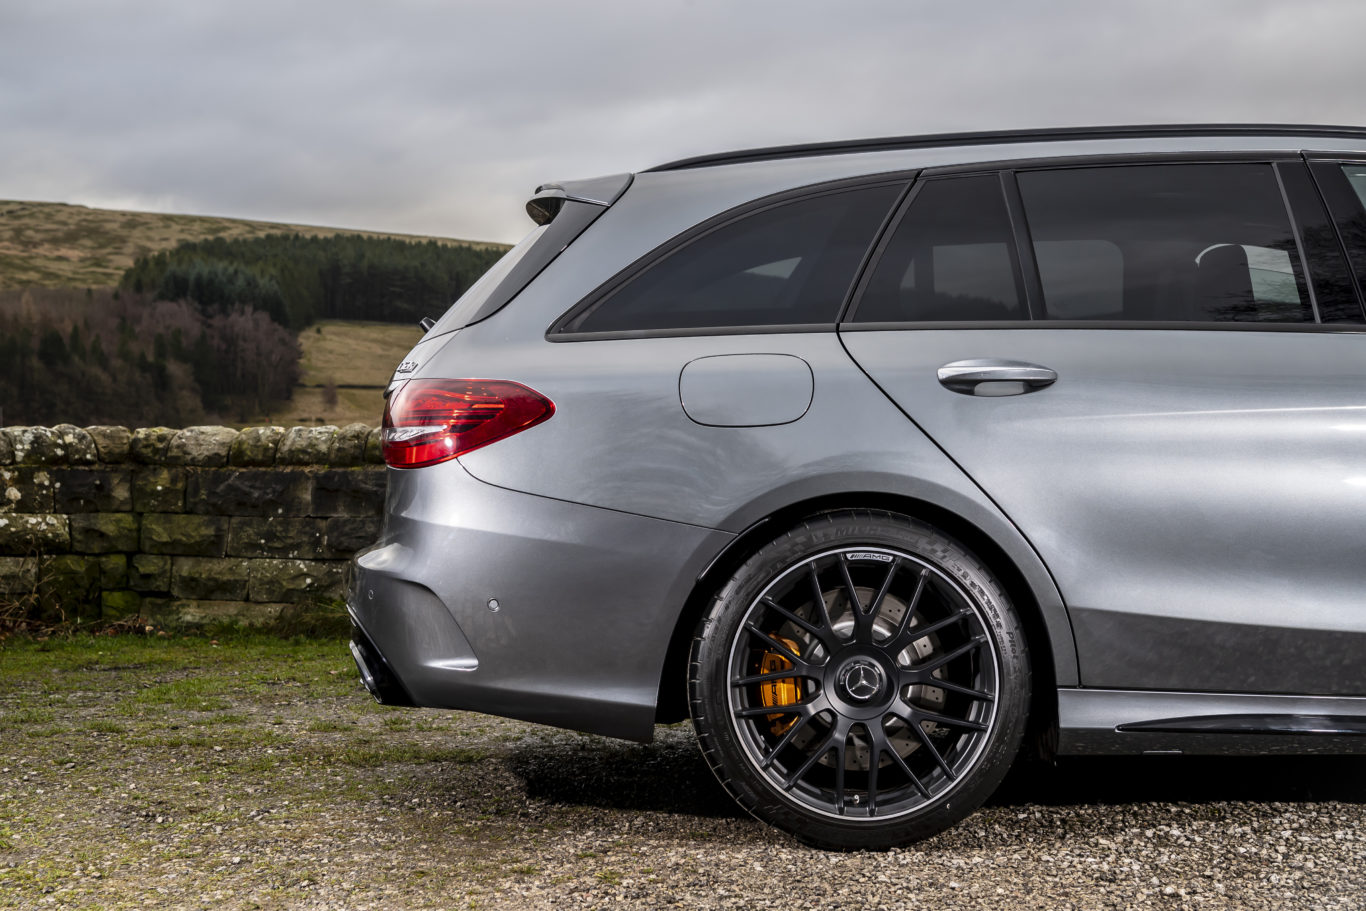 Uk Drive The Mercedes Amg C63 S Estate Remains A Performance Car For All Occasions Express Star